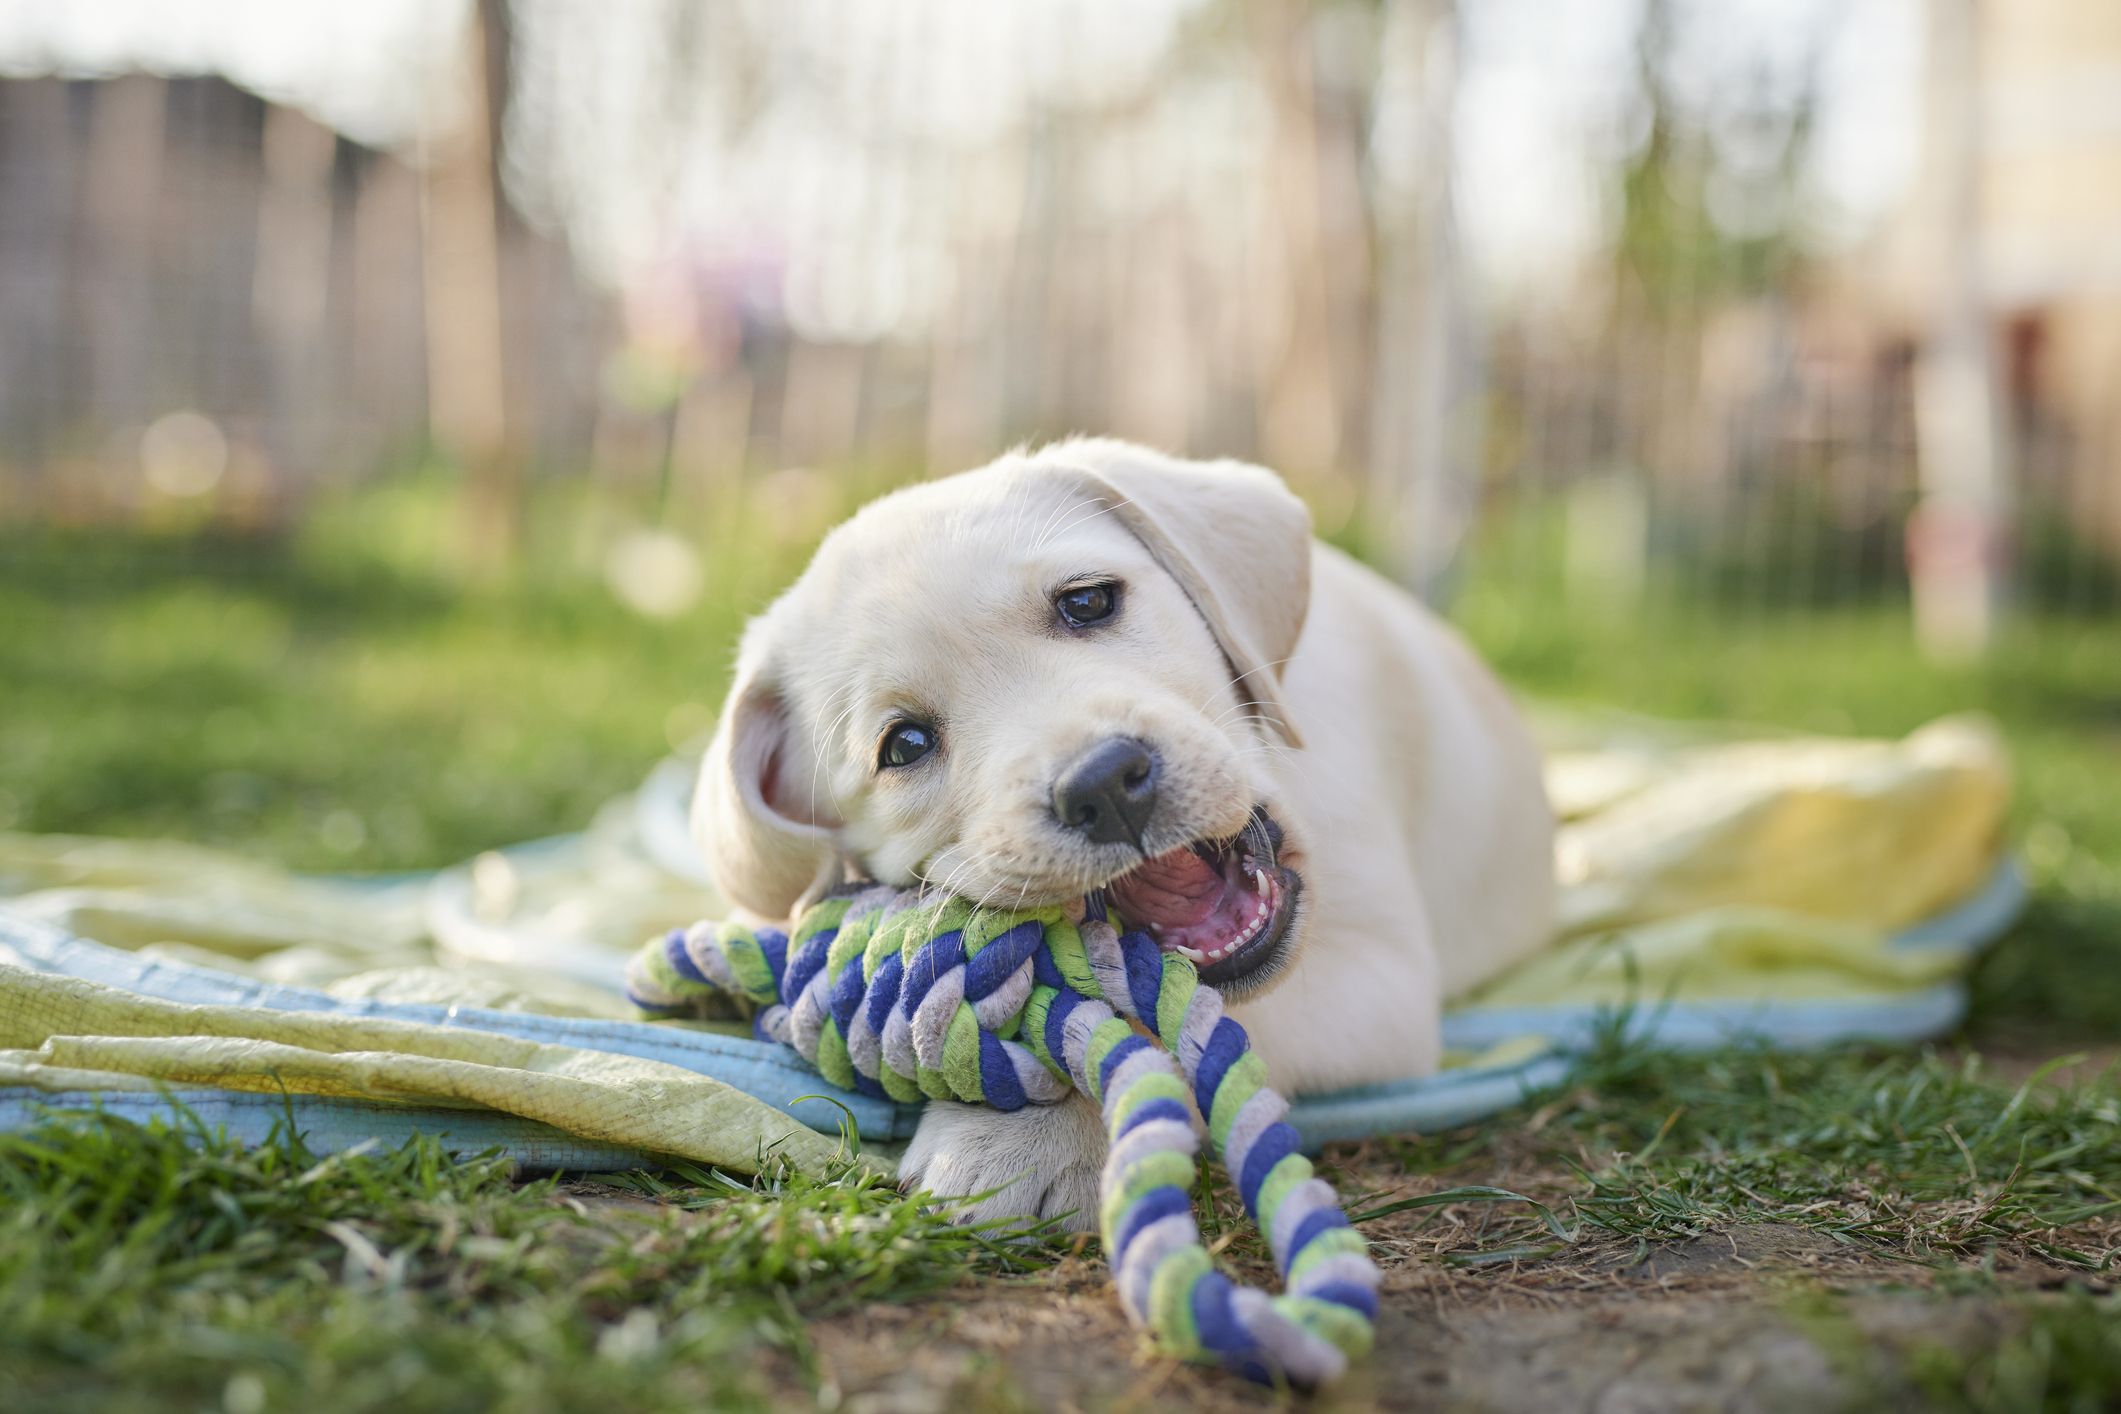 https://hips.hearstapps.com/hmg-prod/images/labrador-puppy-outdoors-royalty-free-image-1678484009.jpg